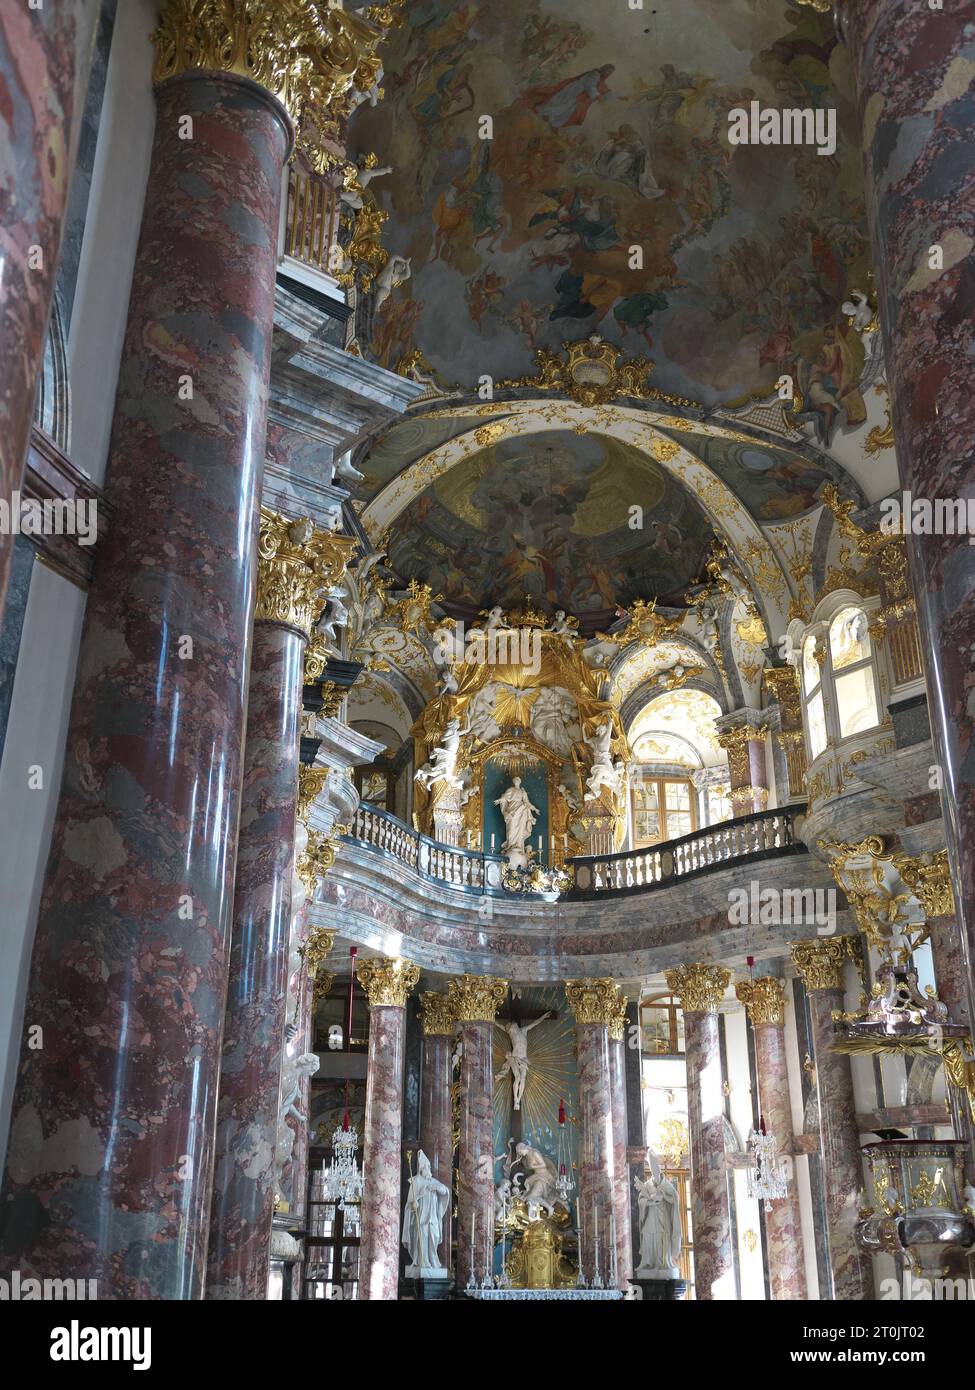 Interior view of the baroque court church of the Würzburg Residence, Germany Stock Photo